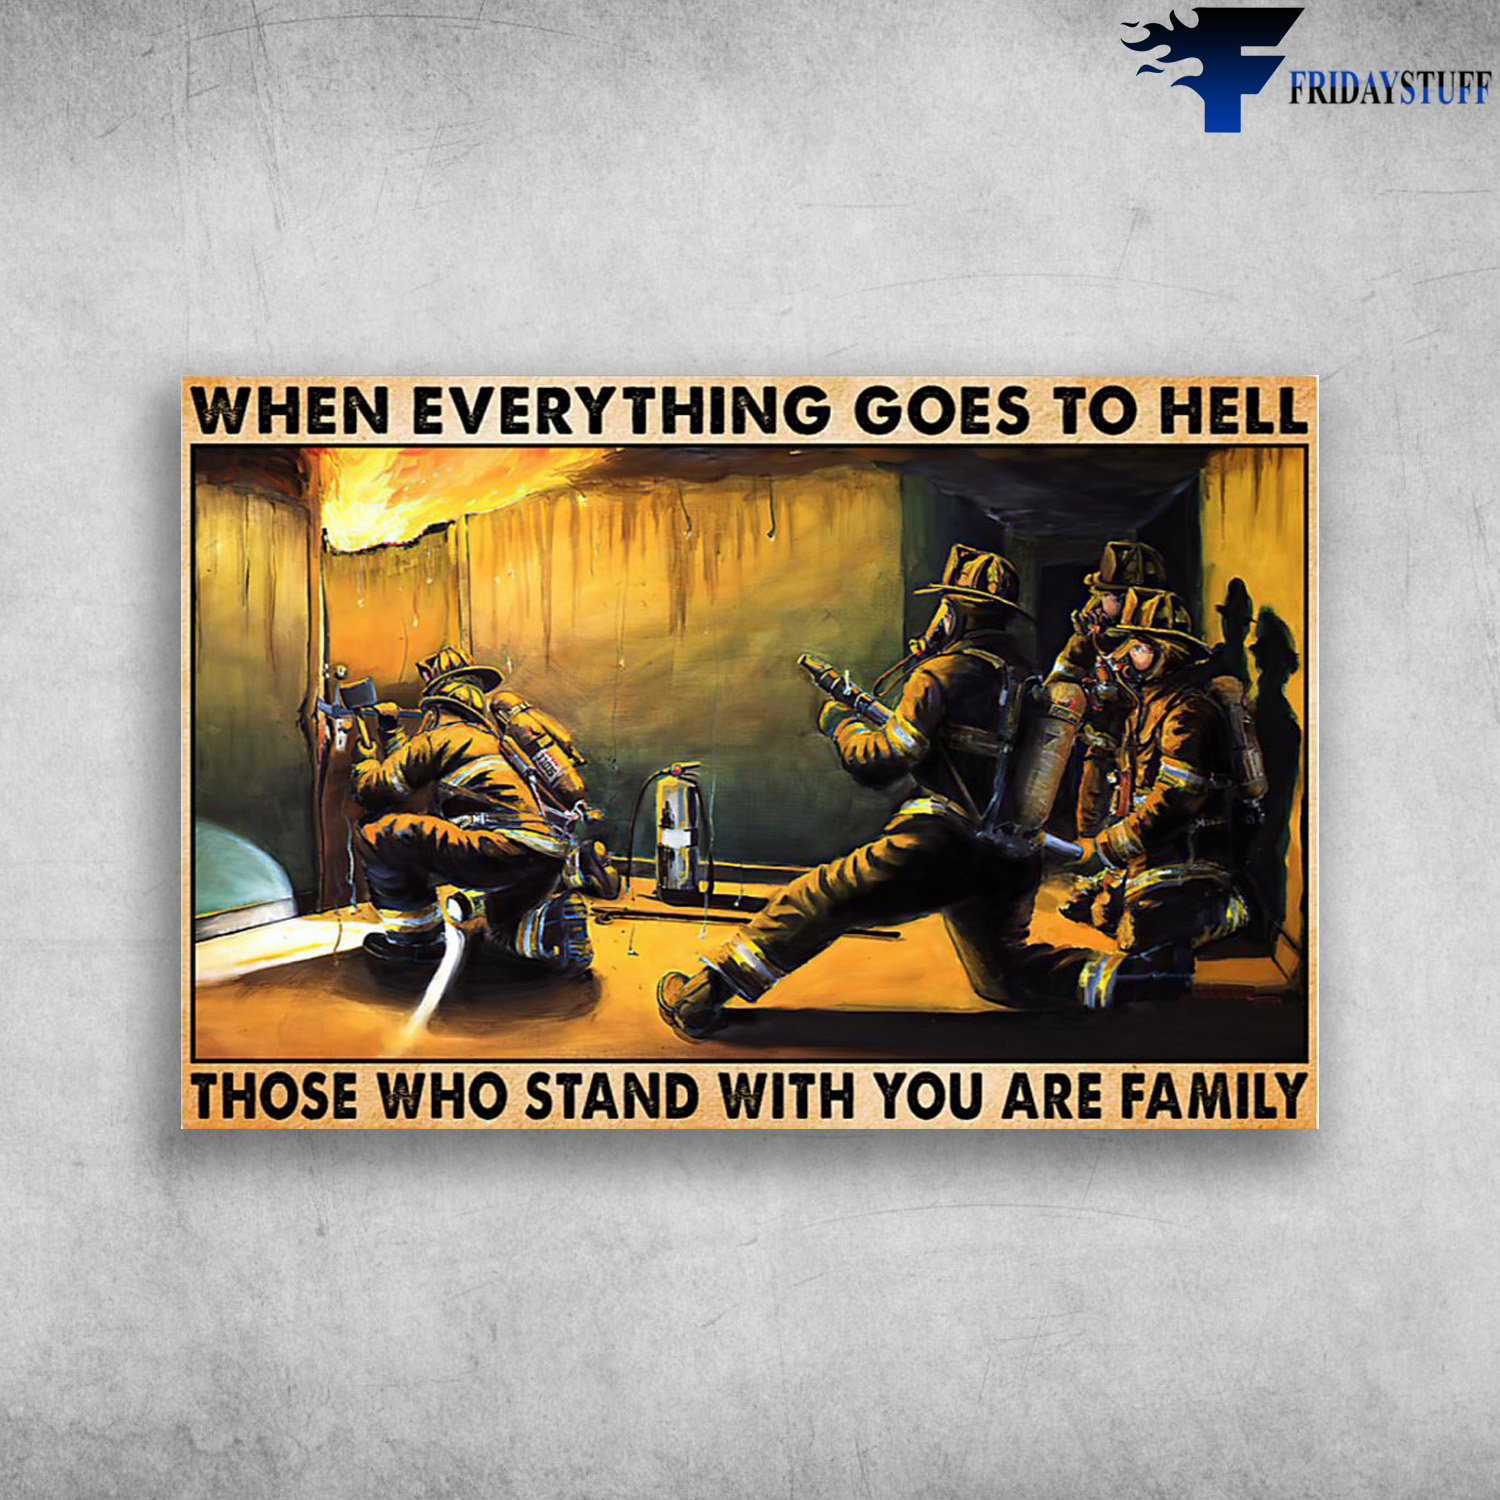 The Firefighter - When Everything Goes To Hell, Those Who Stand With You Are Family